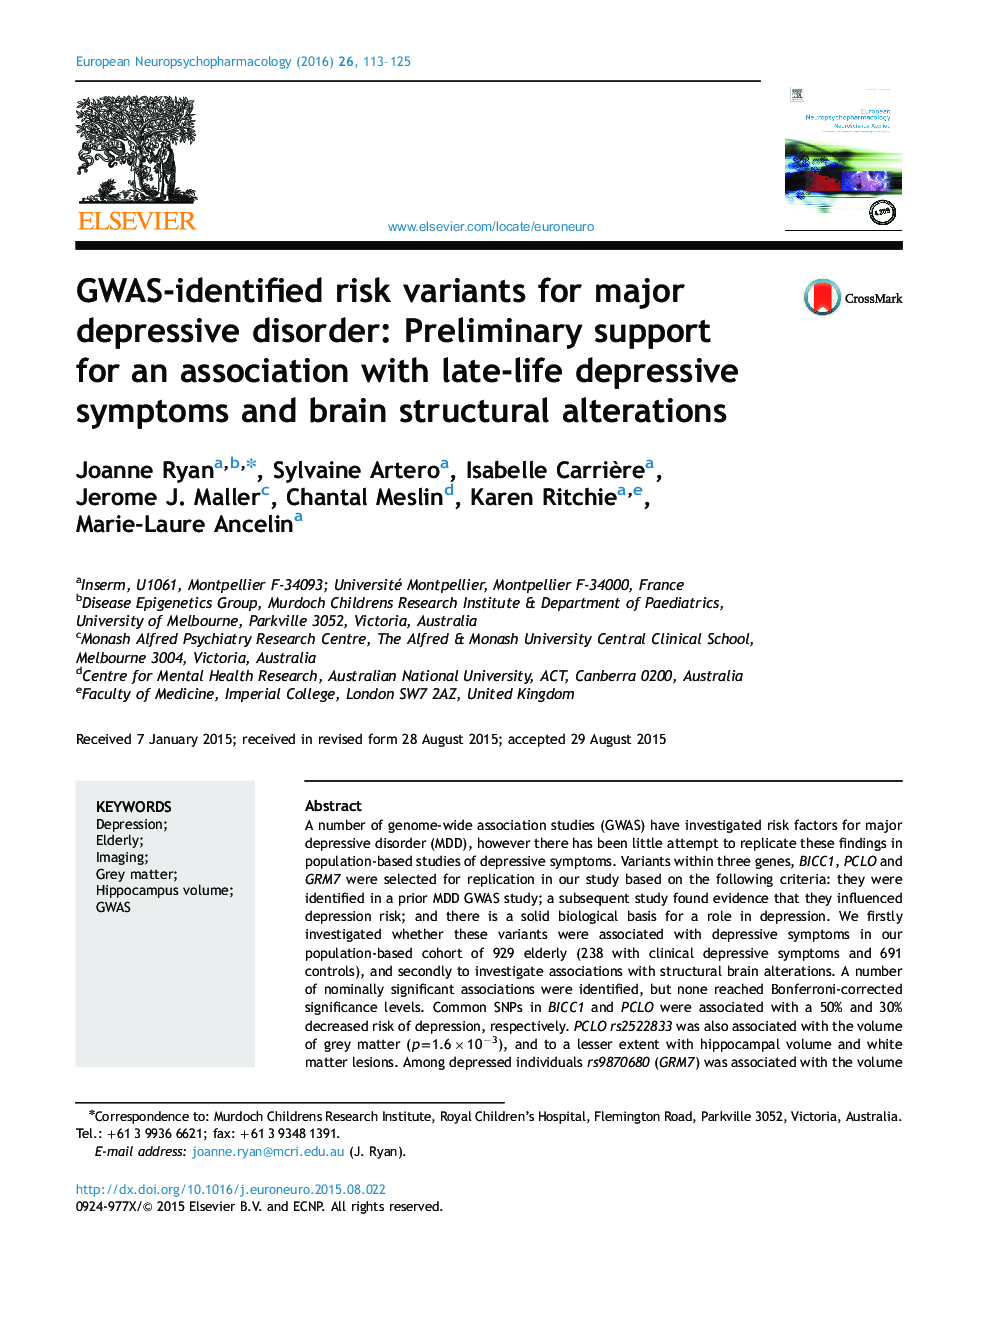 GWAS-identified risk variants for major depressive disorder: Preliminary support for an association with late-life depressive symptoms and brain structural alterations